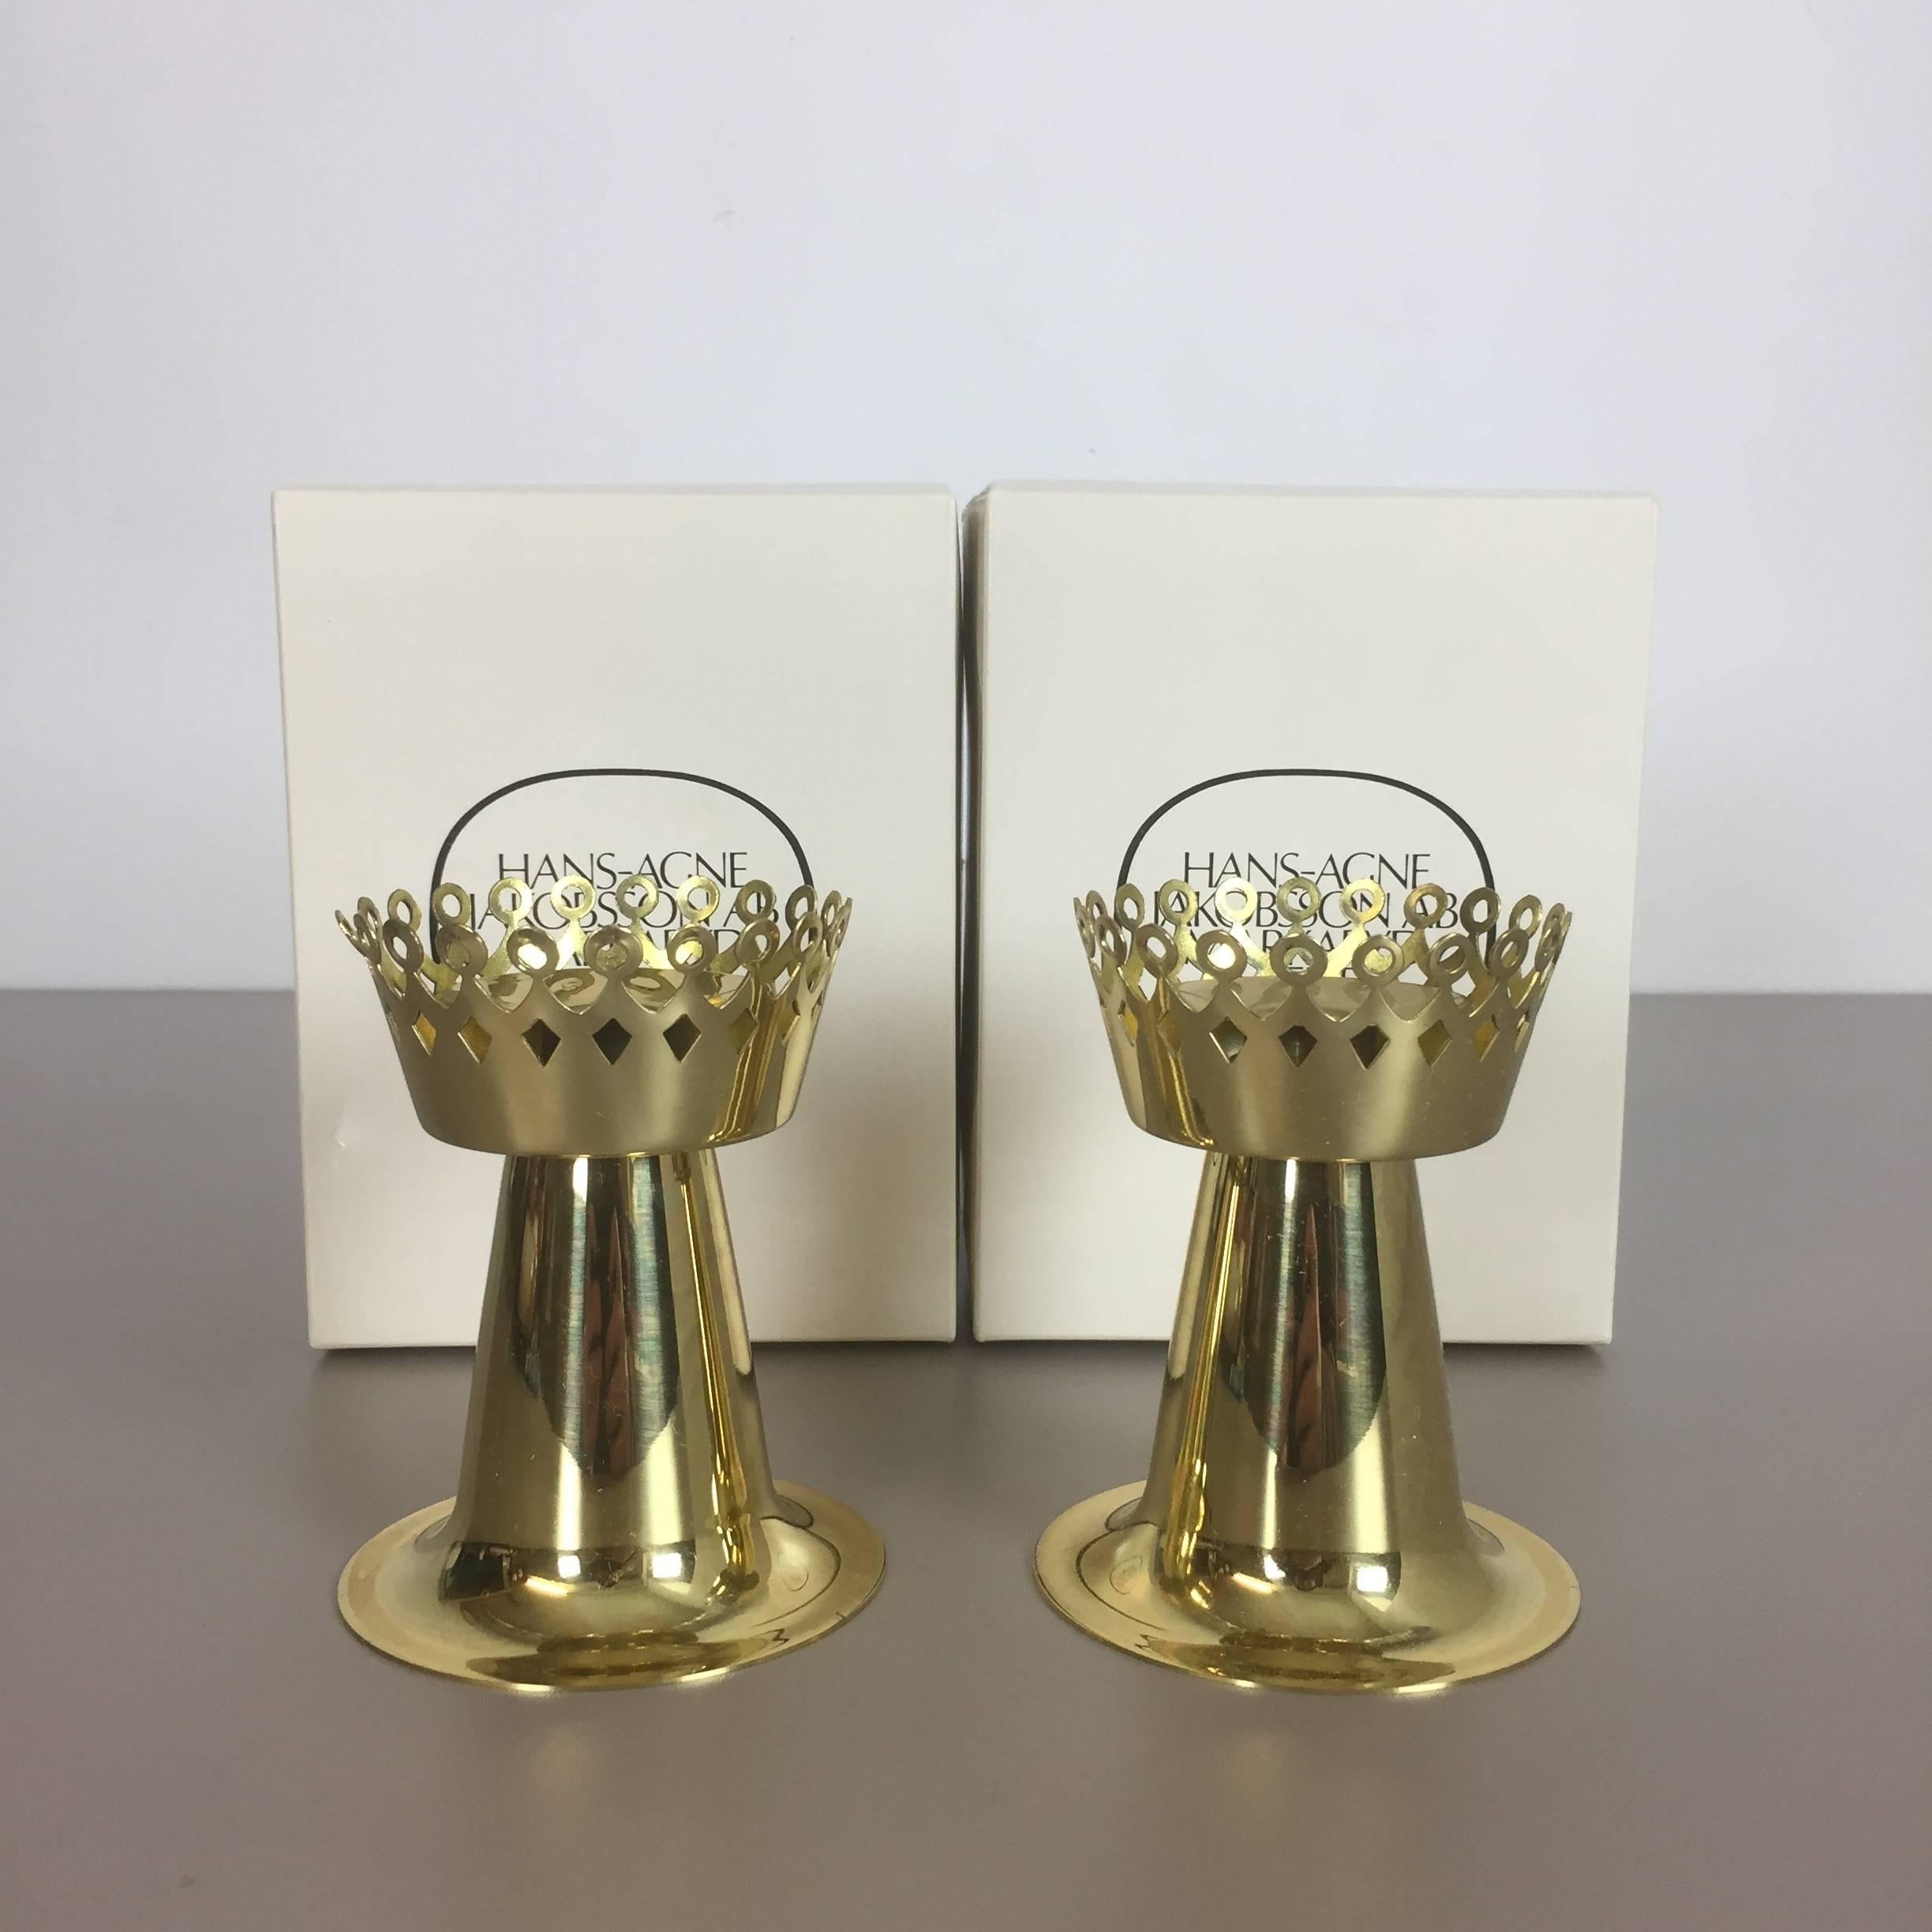 Brass candleholder

Set of two

Hurricane

Nos in original boxes
 
Designed by Hans-Agne Jakobsson

Producer Hans-Agne Jakobsson A.B. Markaryd Sweden,

1960s

This candlelight holder was designed by Hans-Agne Jakobsson in the 1950s and